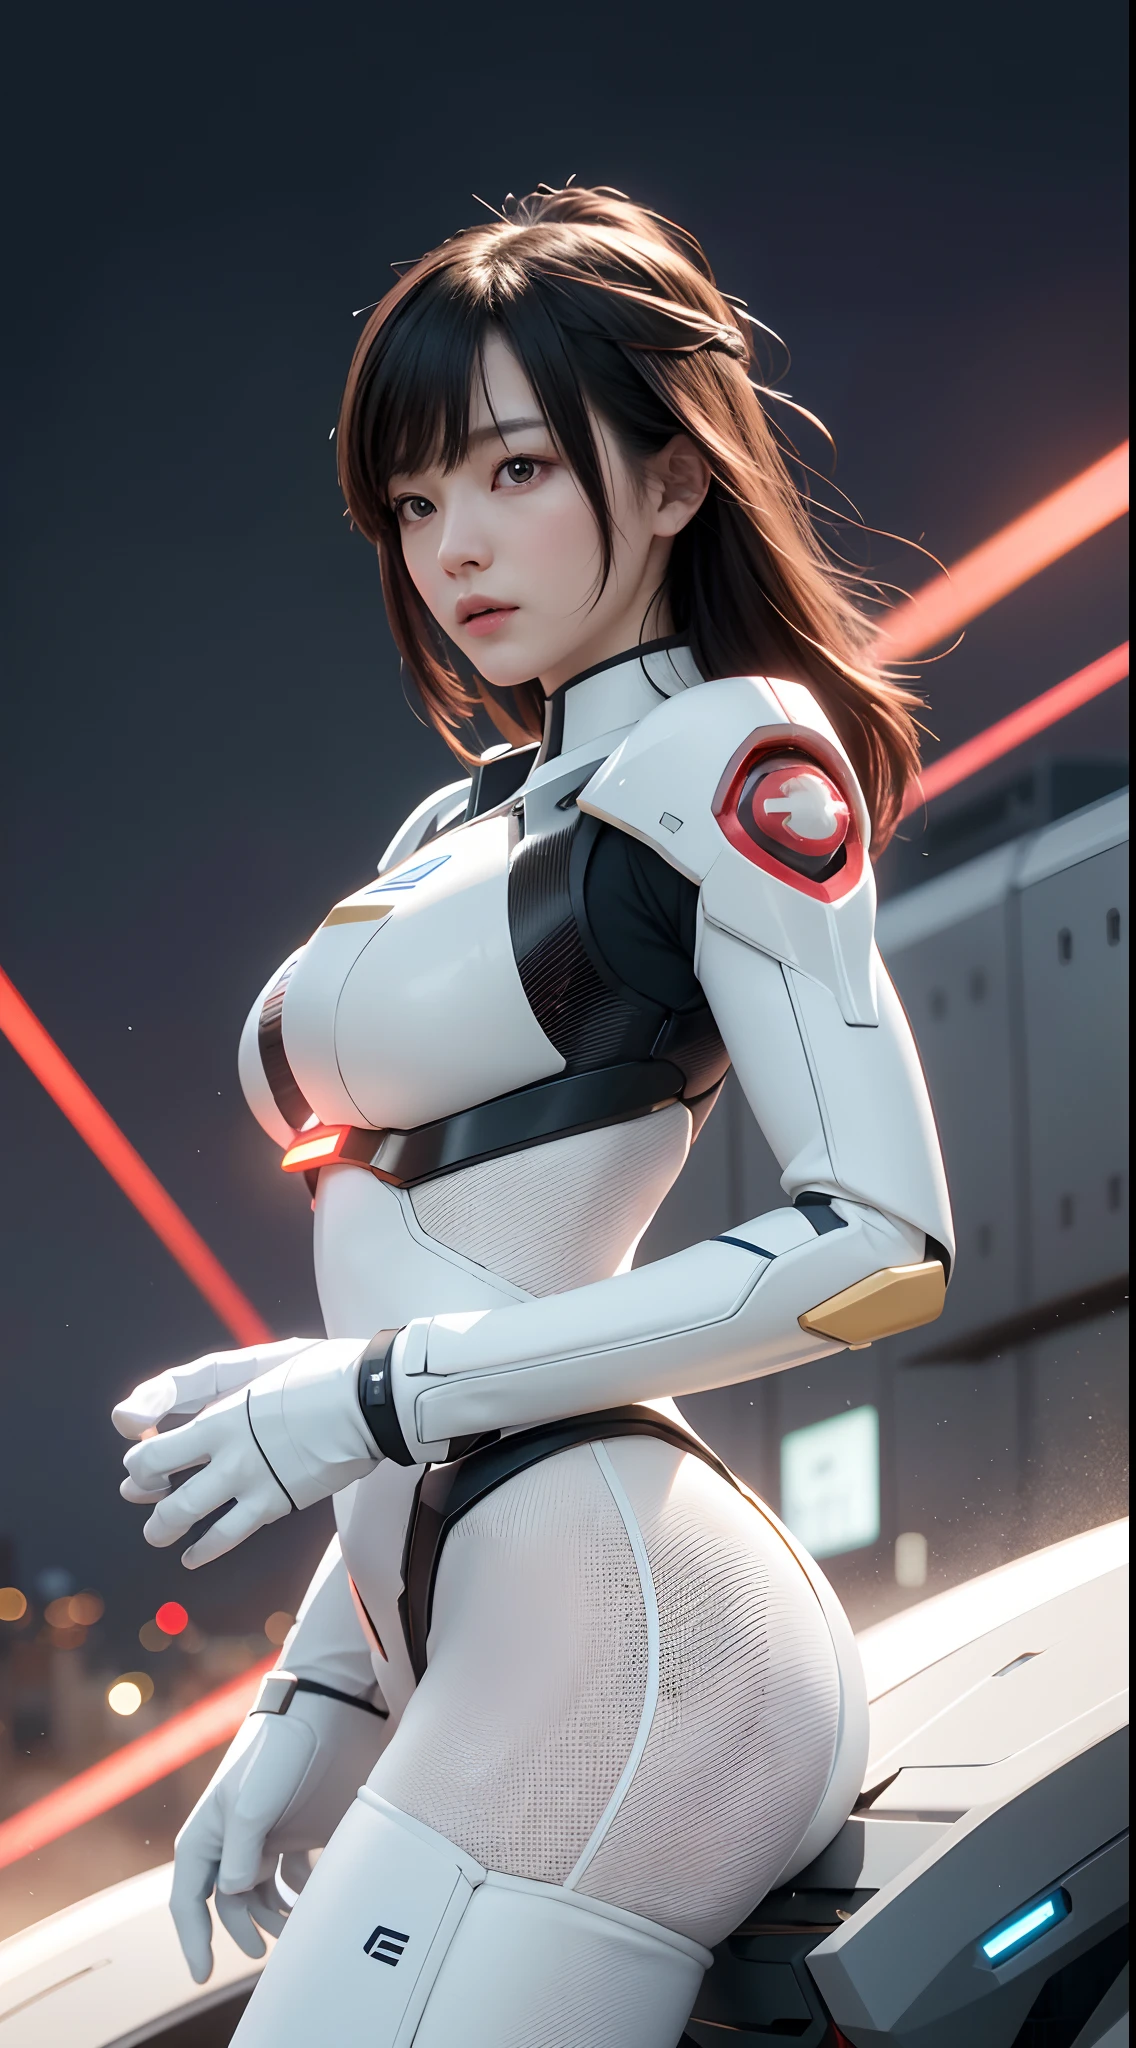 Gundam Mech , Feminine body line，Light equipment，Delicate structure，Science fiction, Front view, Sense of technology, C4D, OC Renderer, Unreal Engine, high detailing, industrial design, 8K HD, studio lights,Futuristic city night view background(Best Quality,4K,High resolution),Image Color: METALIC RED，White and yellow lines，Cat-motif design，Sharp rounded body lines，The structure of the female body，Patlabor